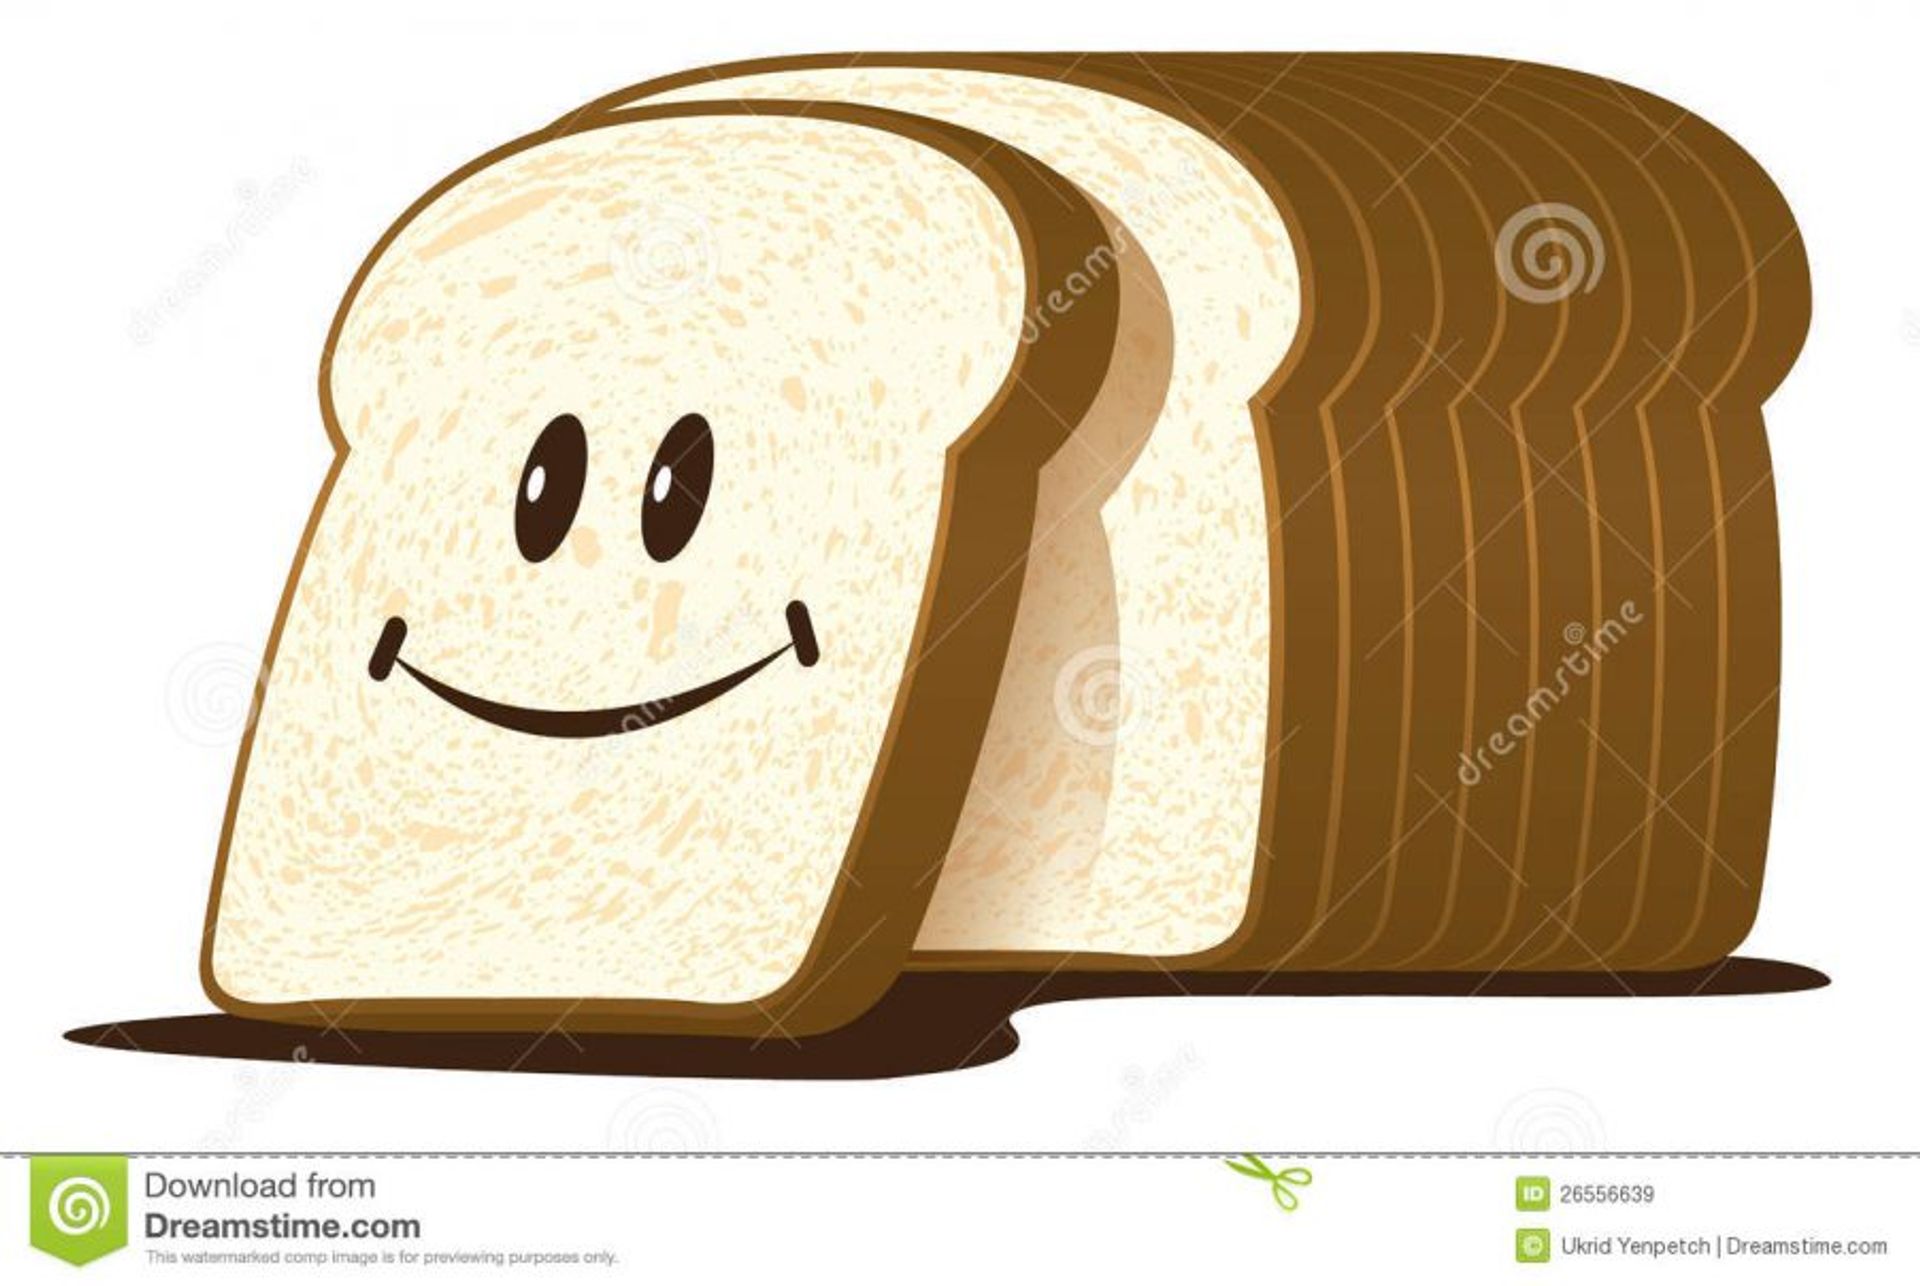 slice-of-bread-clipart-cut-loaf-bread-26556639